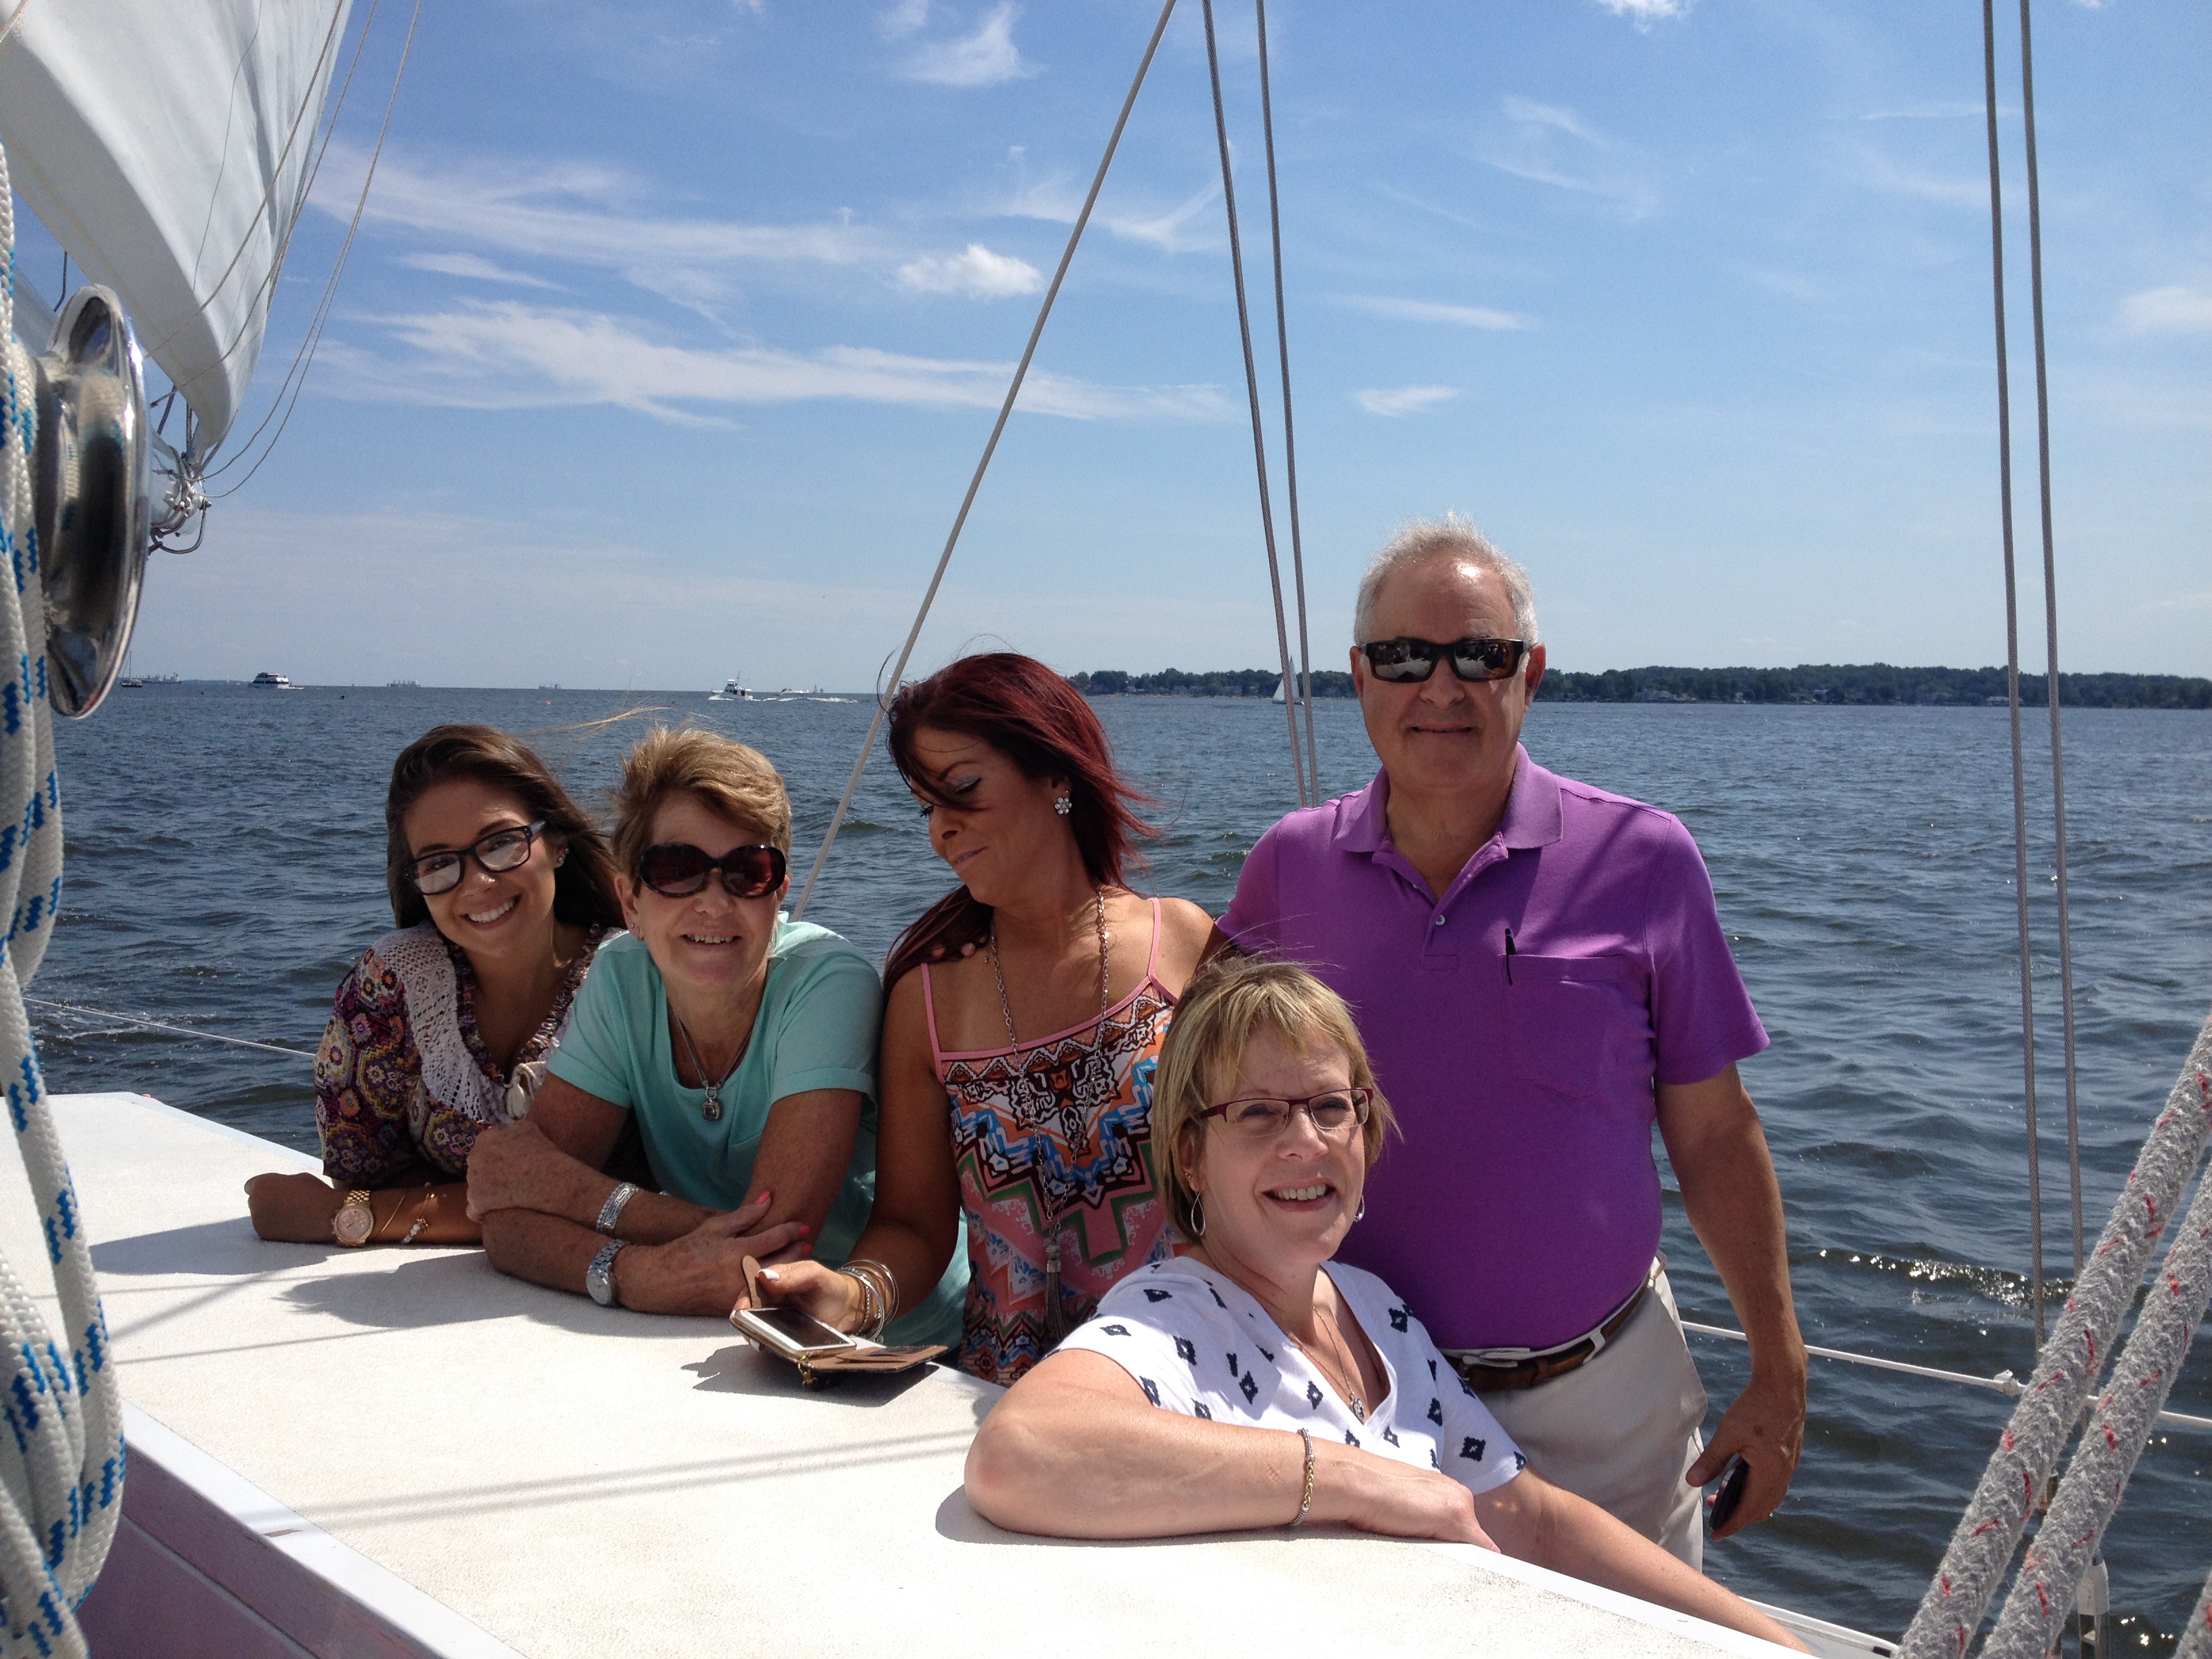 Family of five enjoying a sunny day sail on the Chesapeake Bay